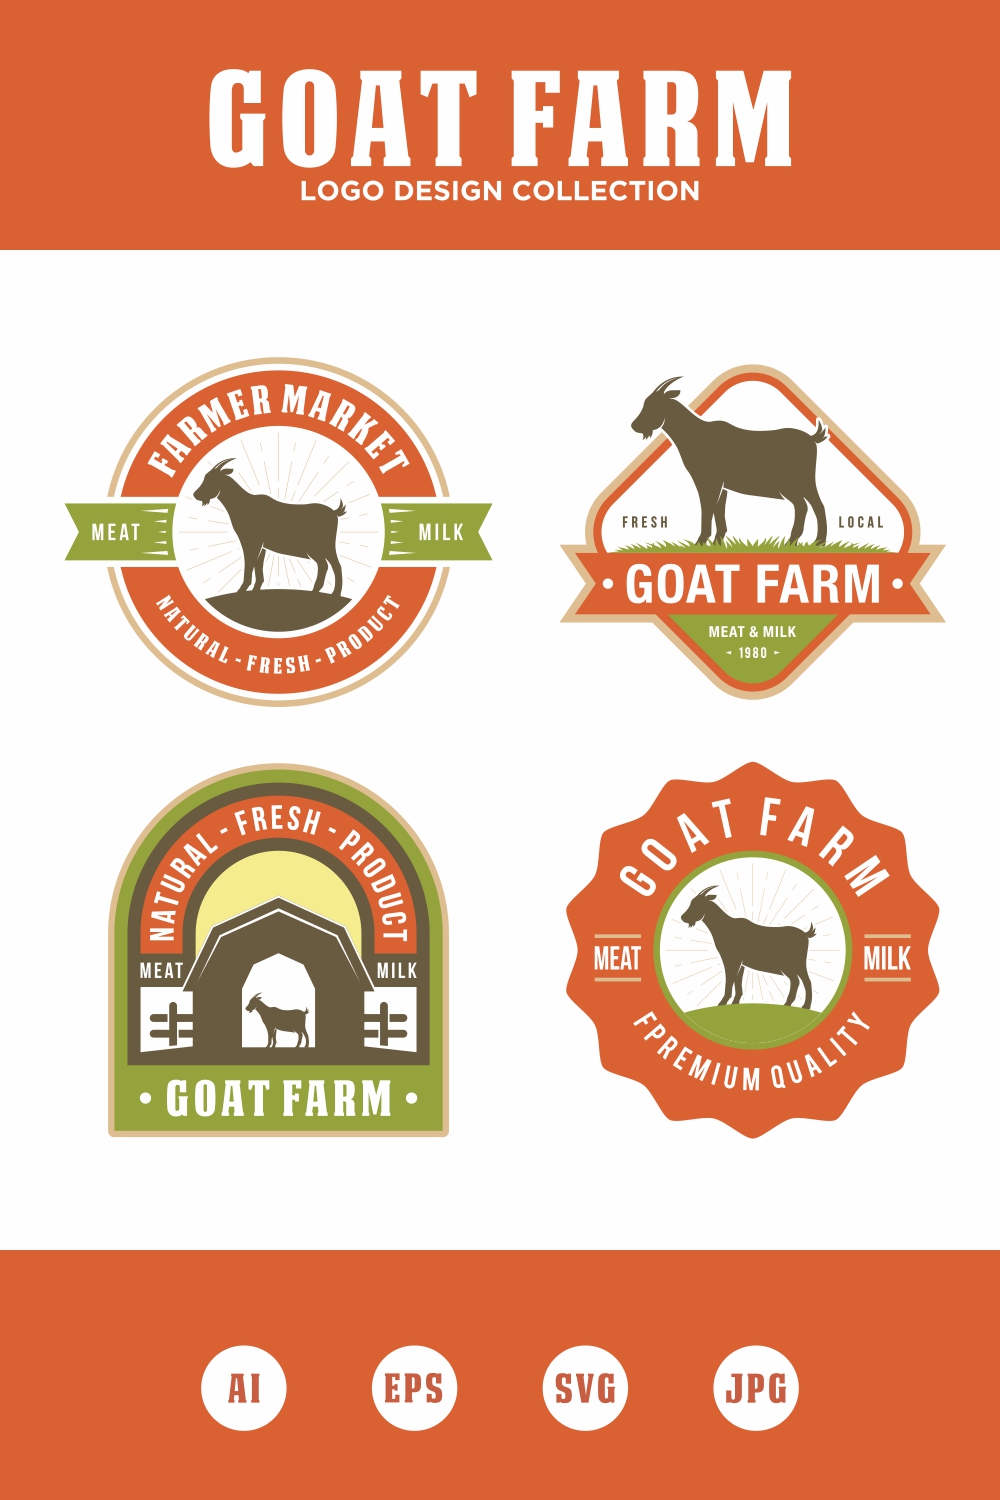 Goat Farm logo design collection - only 10$ pinterest preview image.